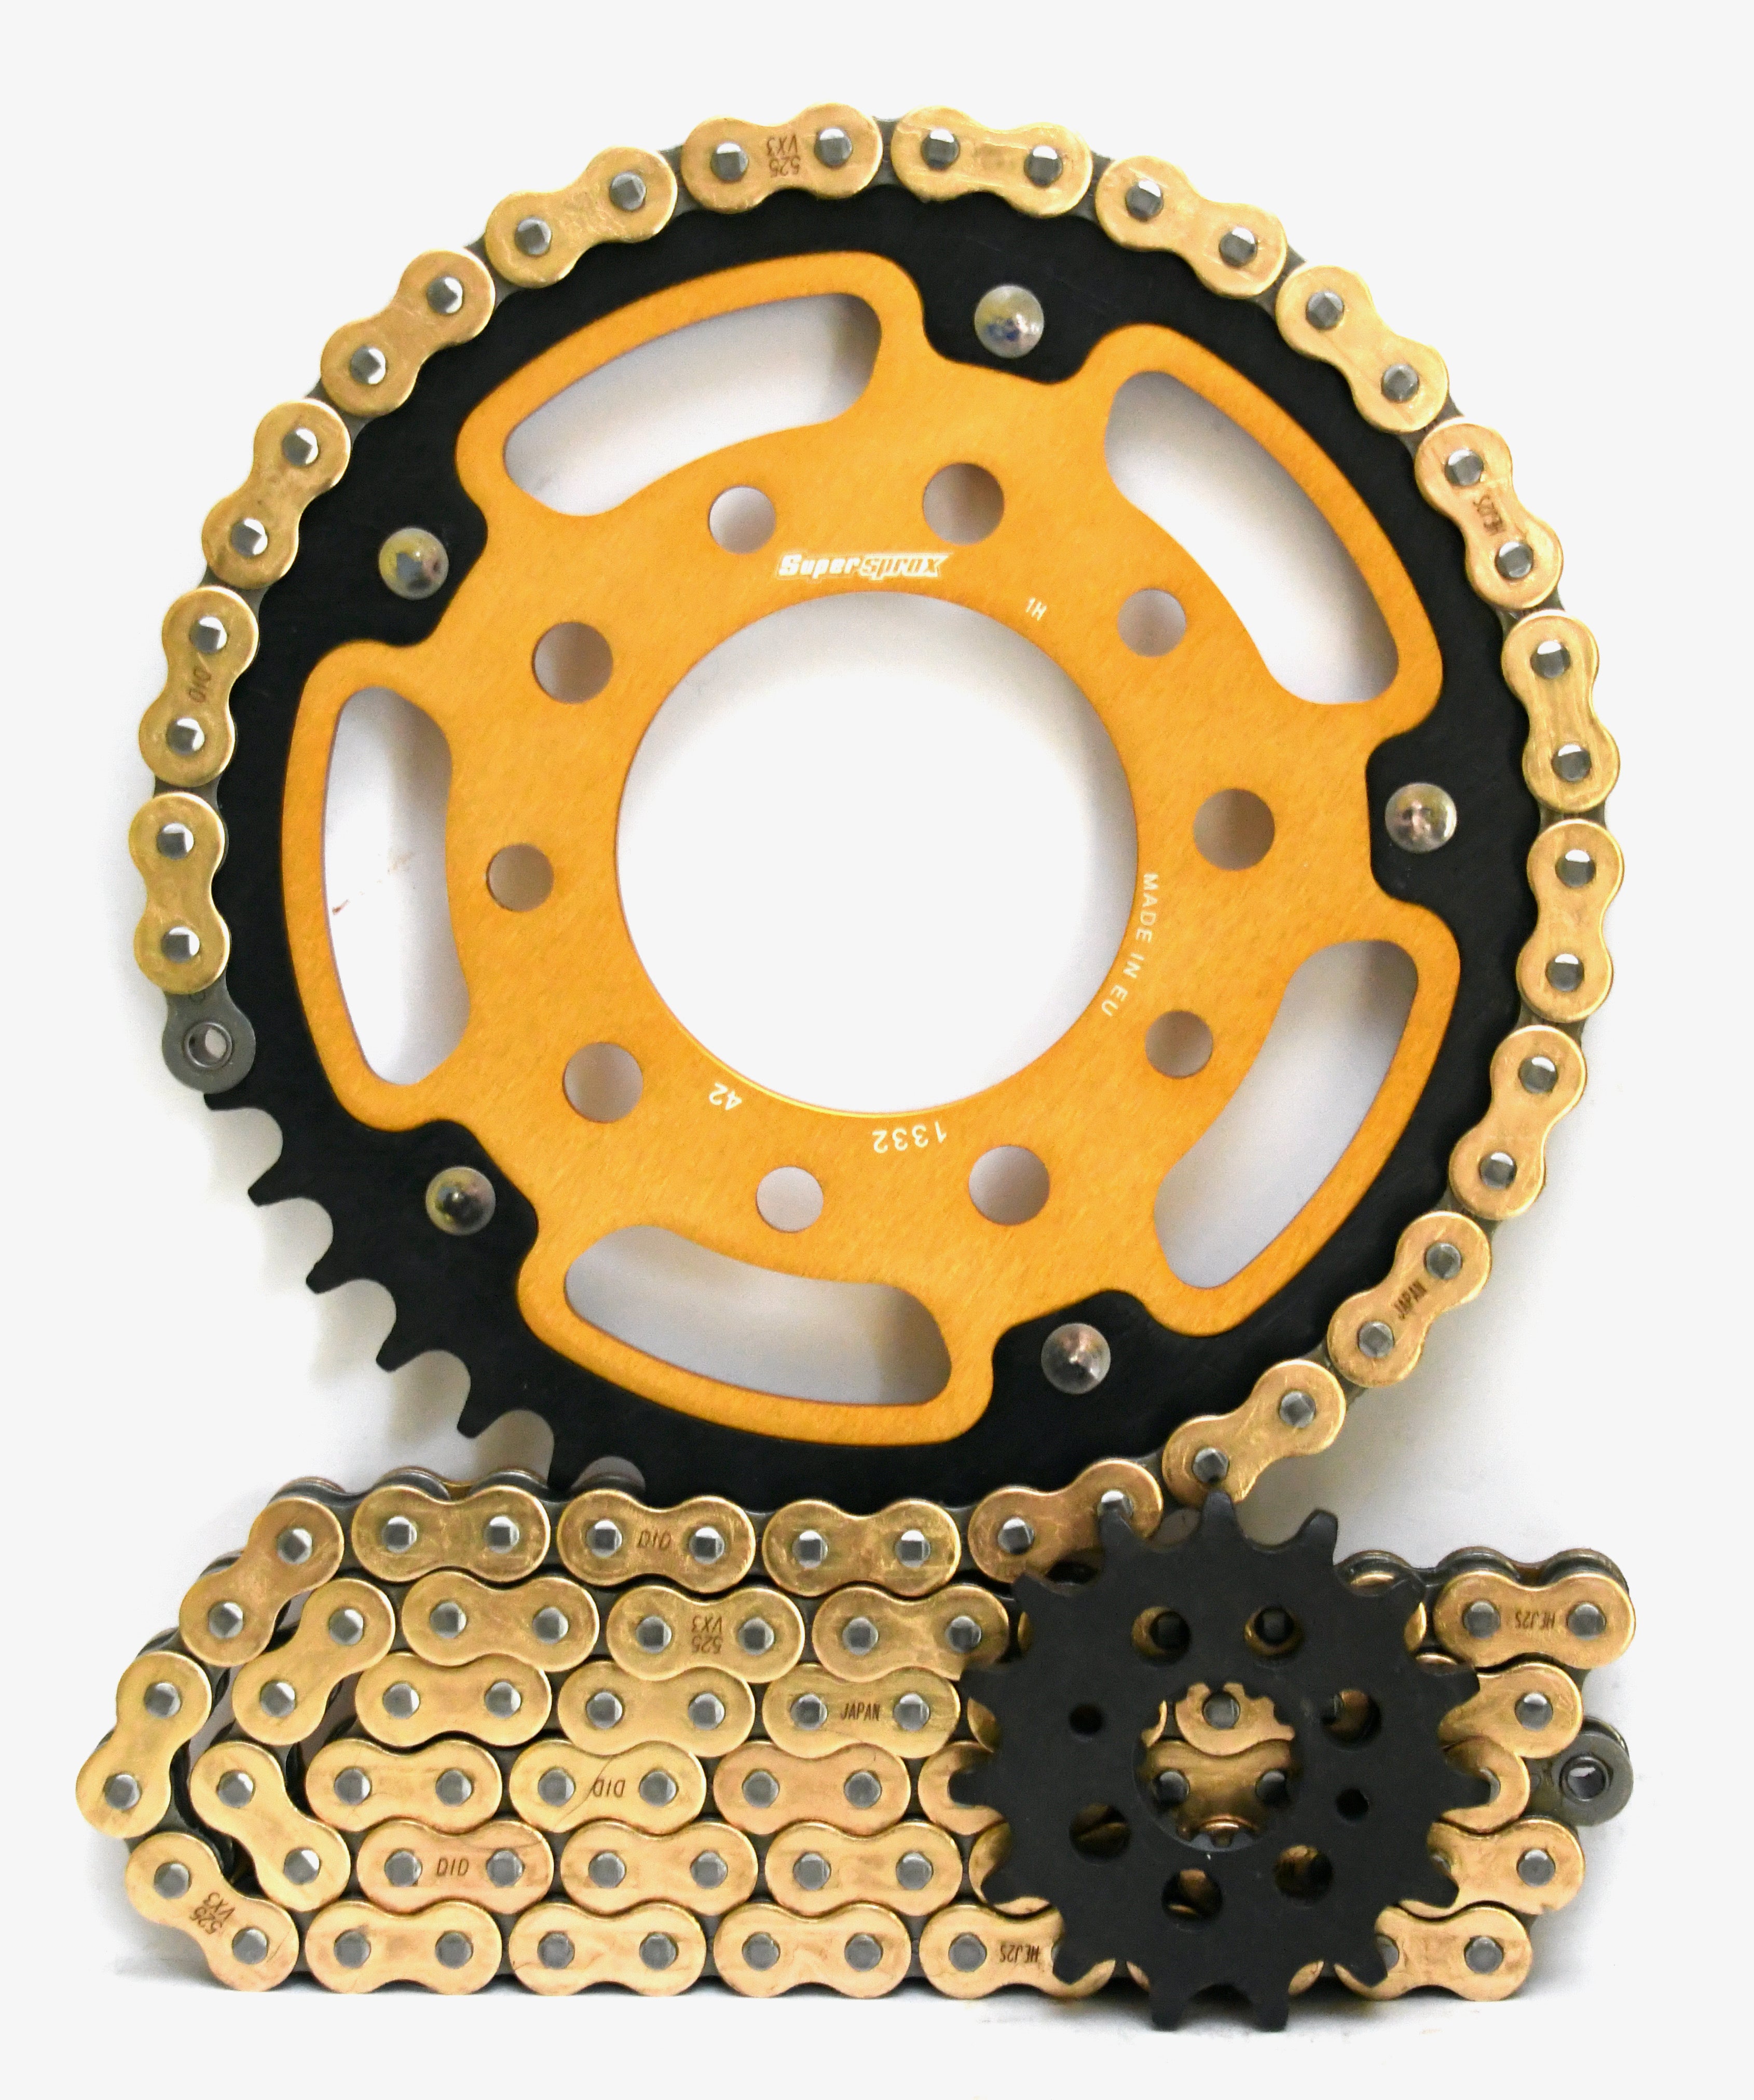 Supersprox Chain and Sprocket Kit - Honda CRF1000/1100 Africa Twin 2016> - Standard Gearing